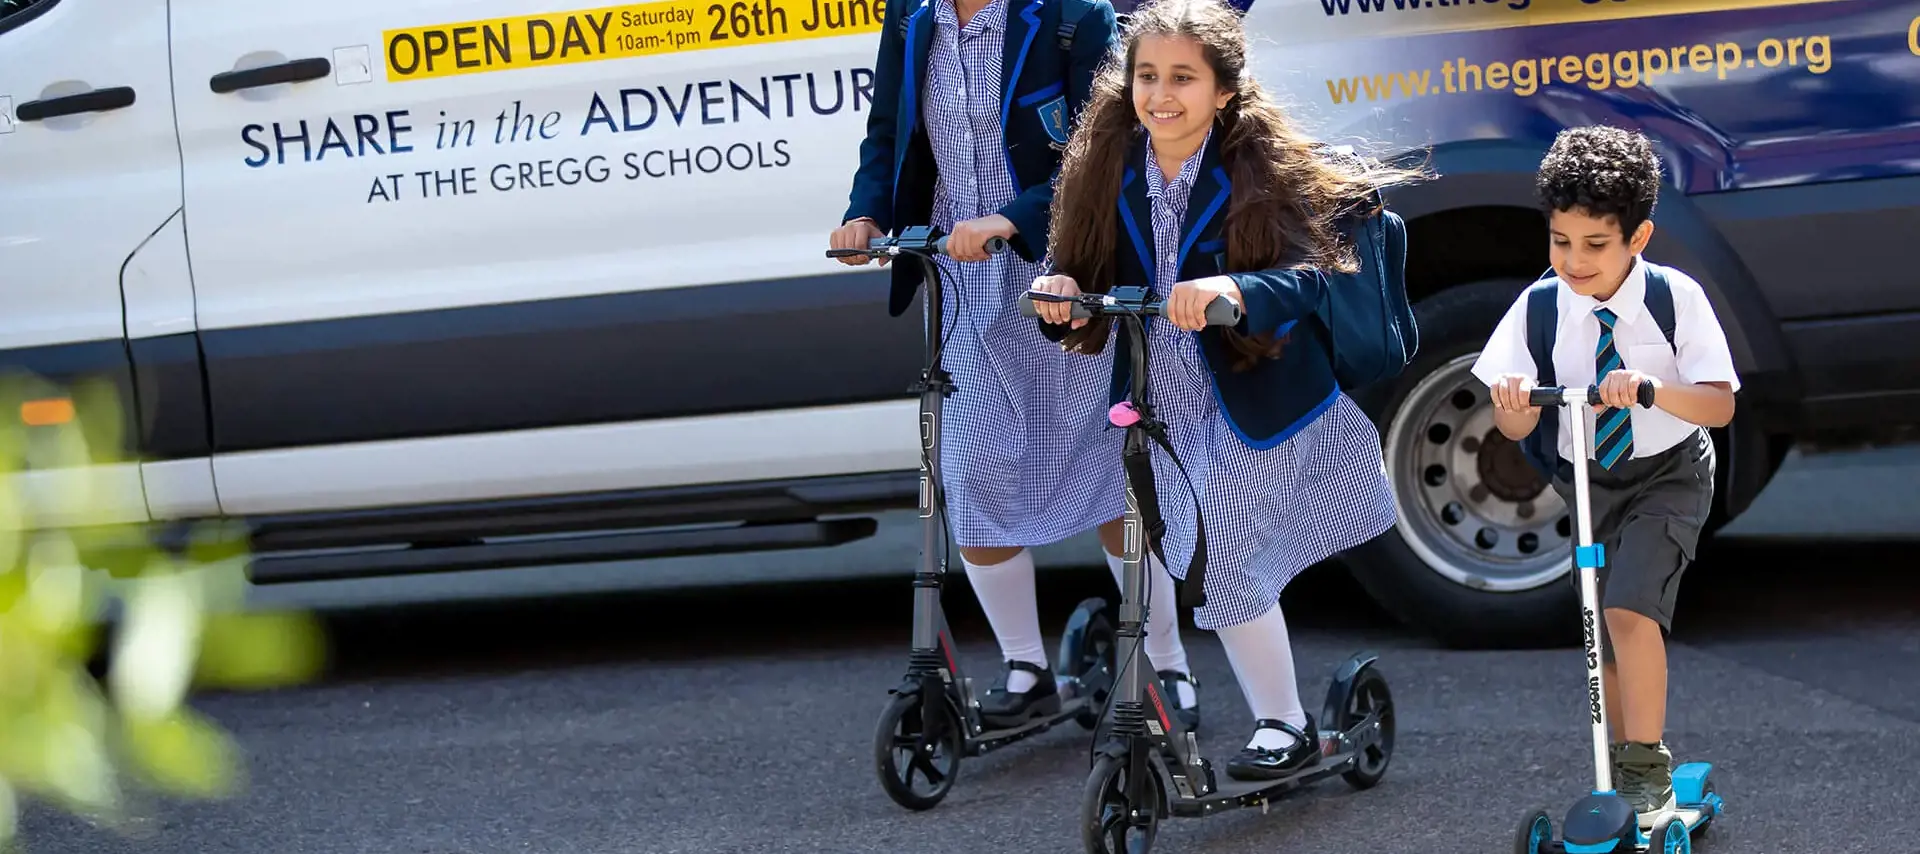 Pupils arriving to school at The Gregg Prep